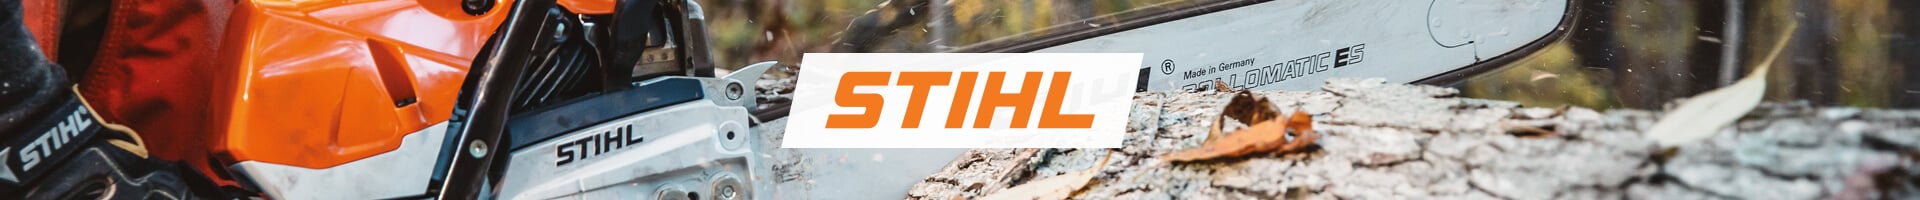 Save up to $50 on select Stihl Products